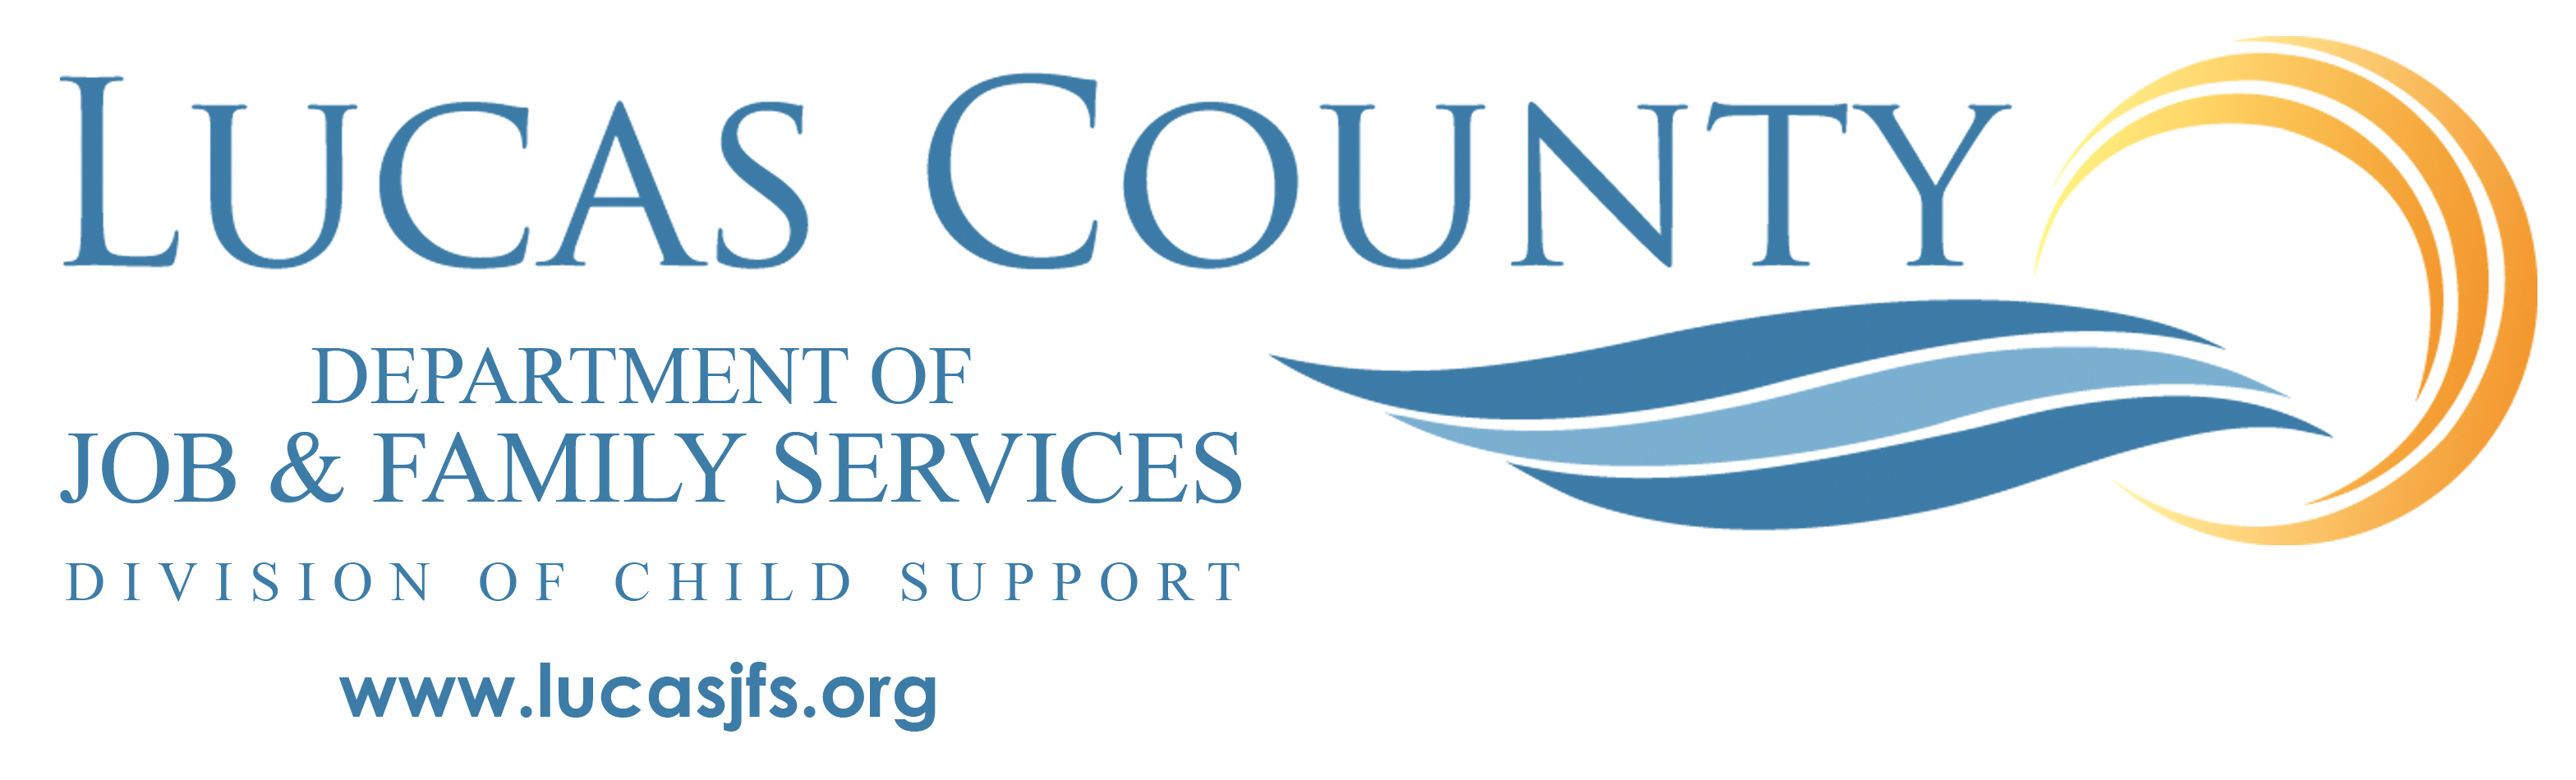 Lucas county department of job and family services